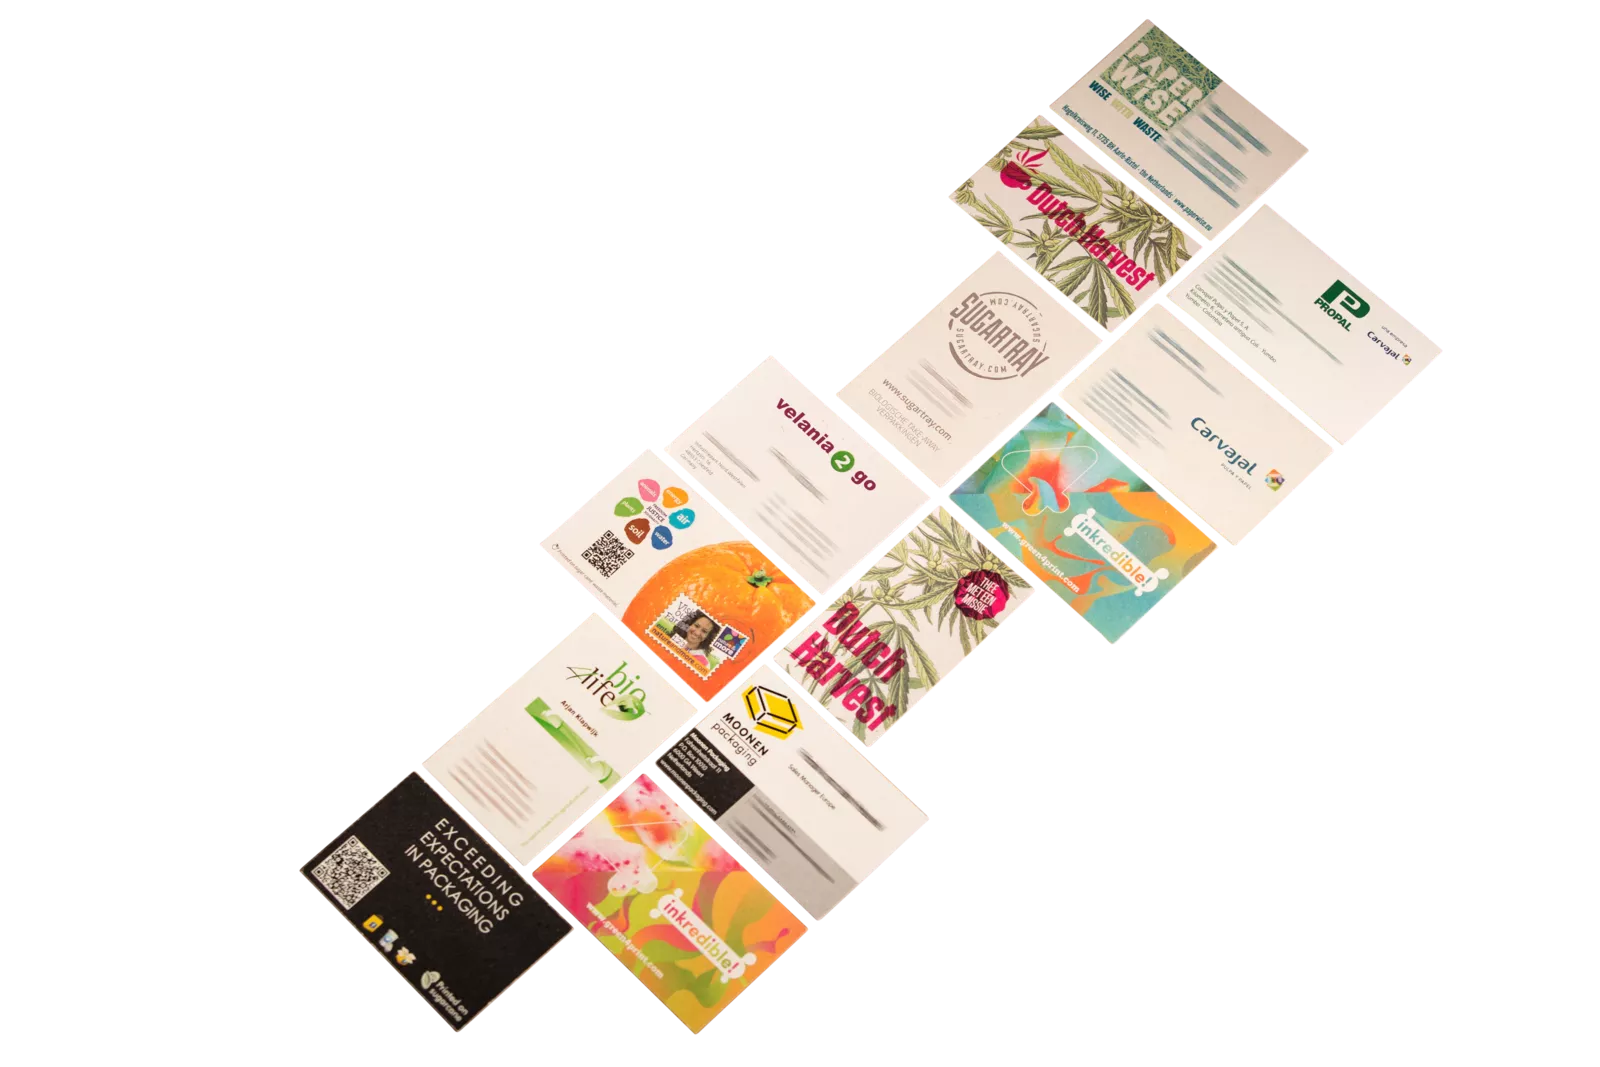 PaperWise eco sustainable paper board printing business cards office promo printingmatters5c